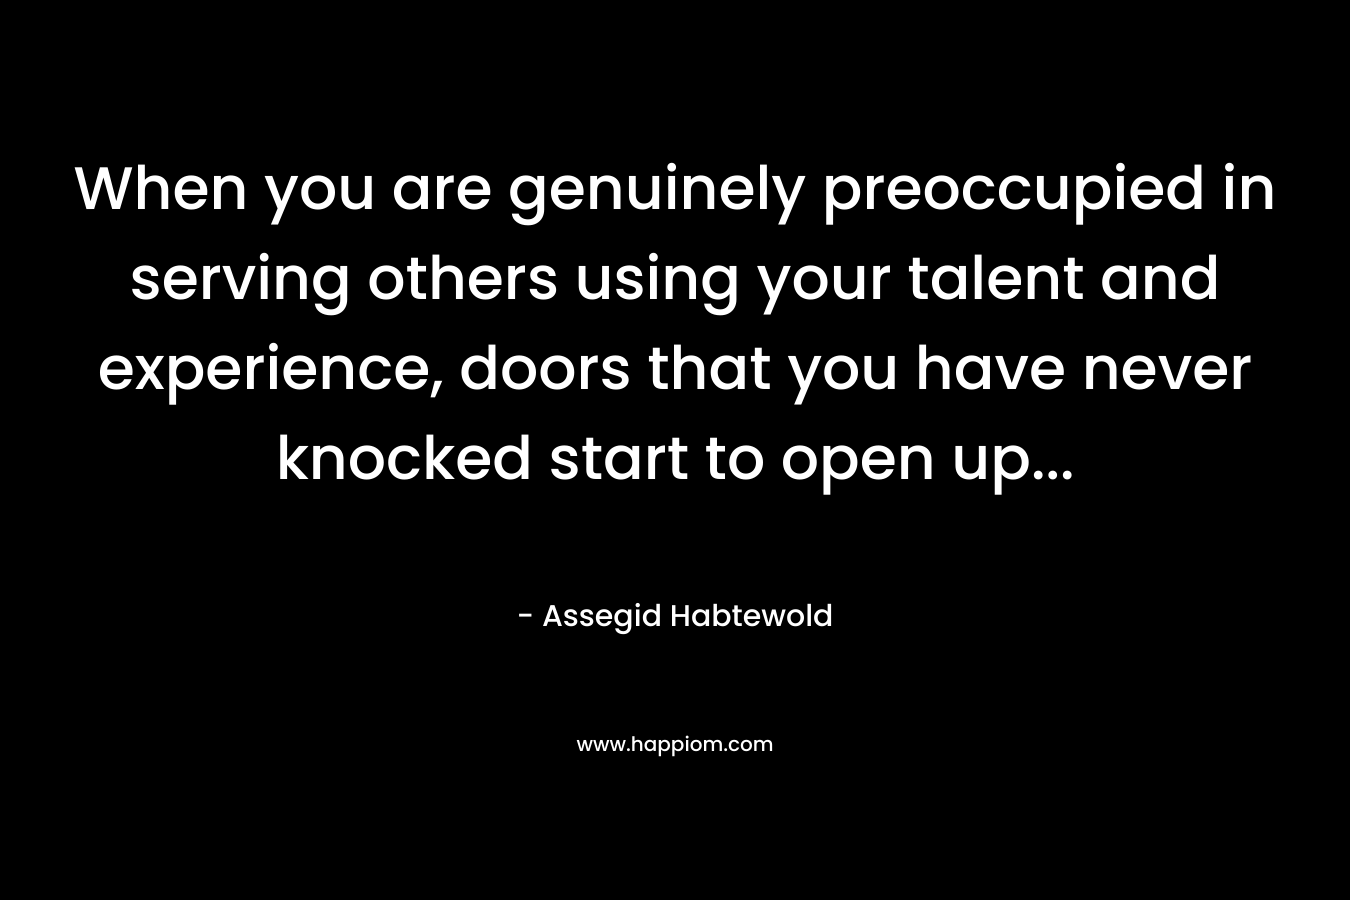 When you are genuinely preoccupied in serving others using your talent and experience, doors that you have never knocked start to open up...